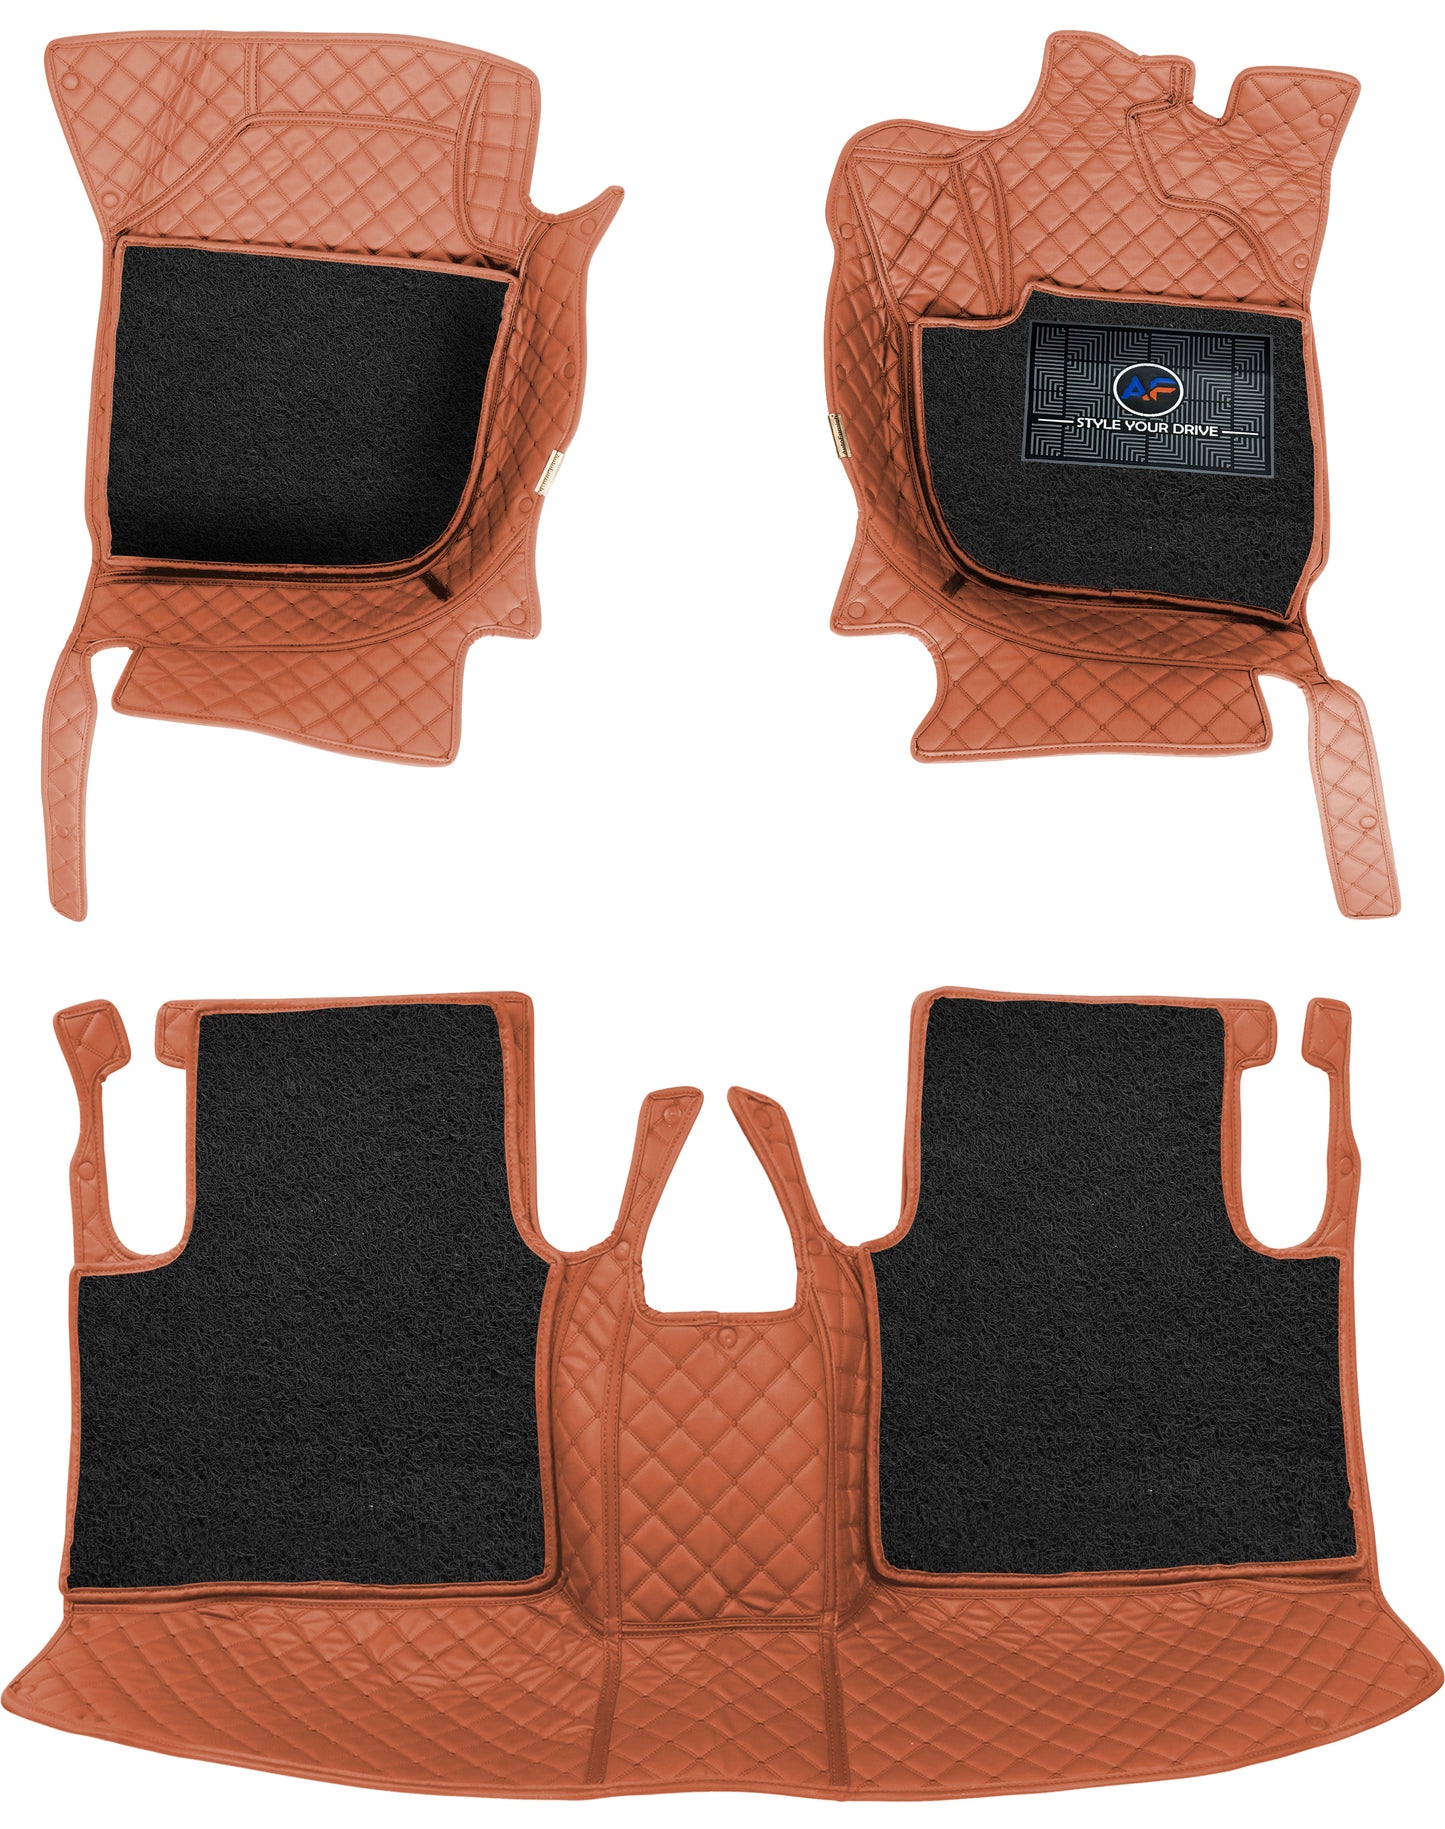 Nissan Micra (2014-18)-7D Luxury Car Mat, All Weather Proof, Anti-Skid, 100% Waterproof & Odorless with Unique Diamond Fish Design (24mm Luxury PU Leather, 2 Rows)